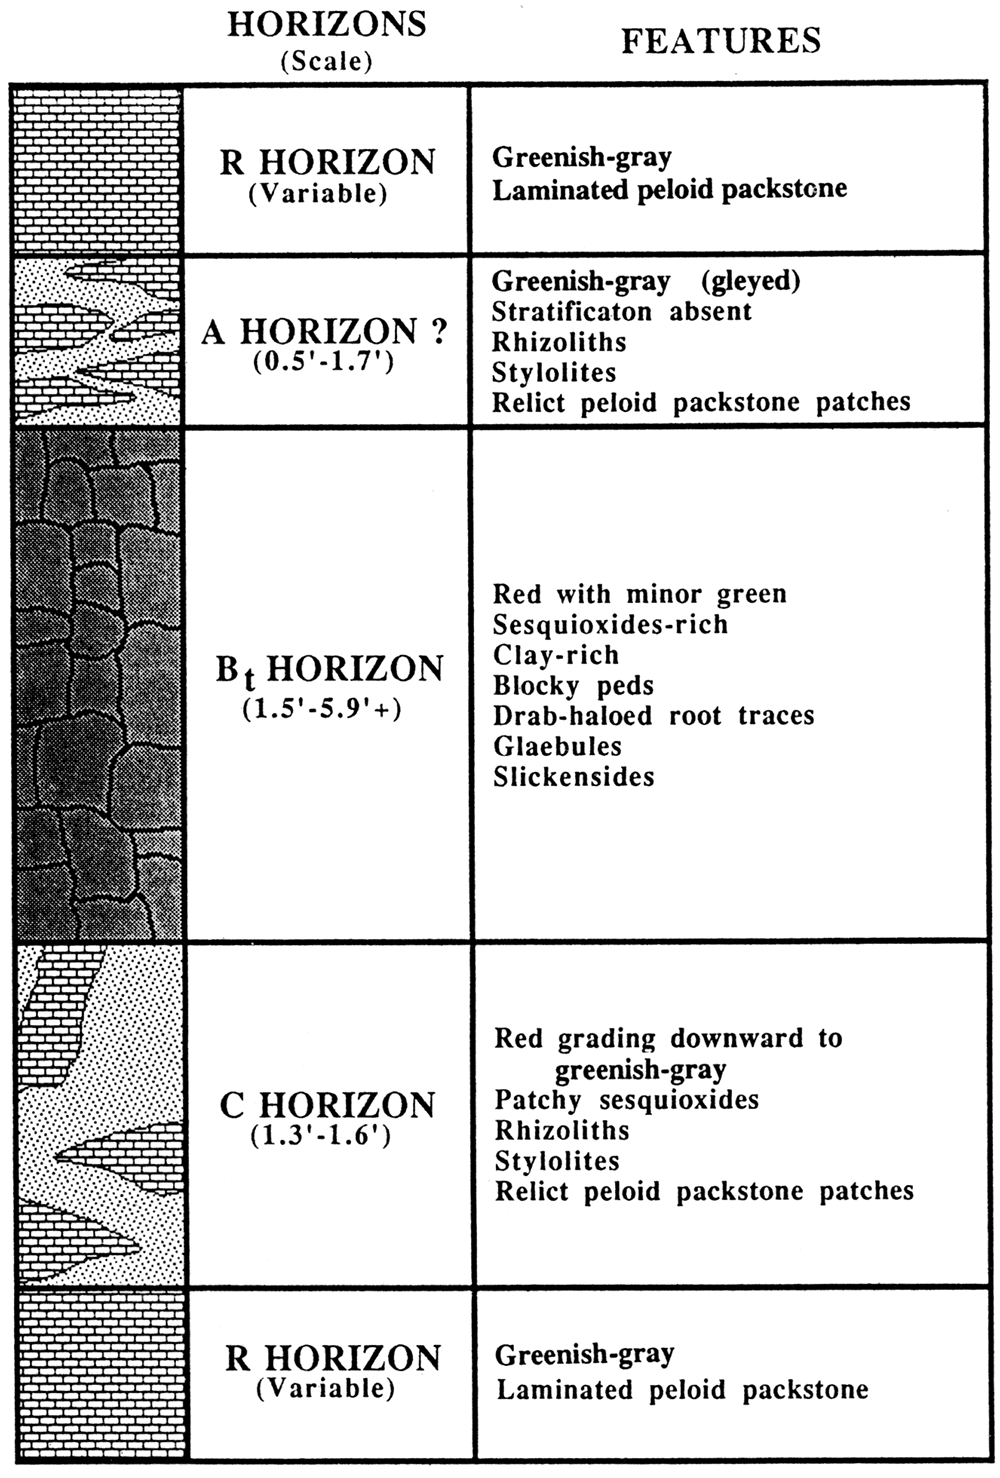 Alfisols showing horizons and features in the Shore Airport Formation type section.